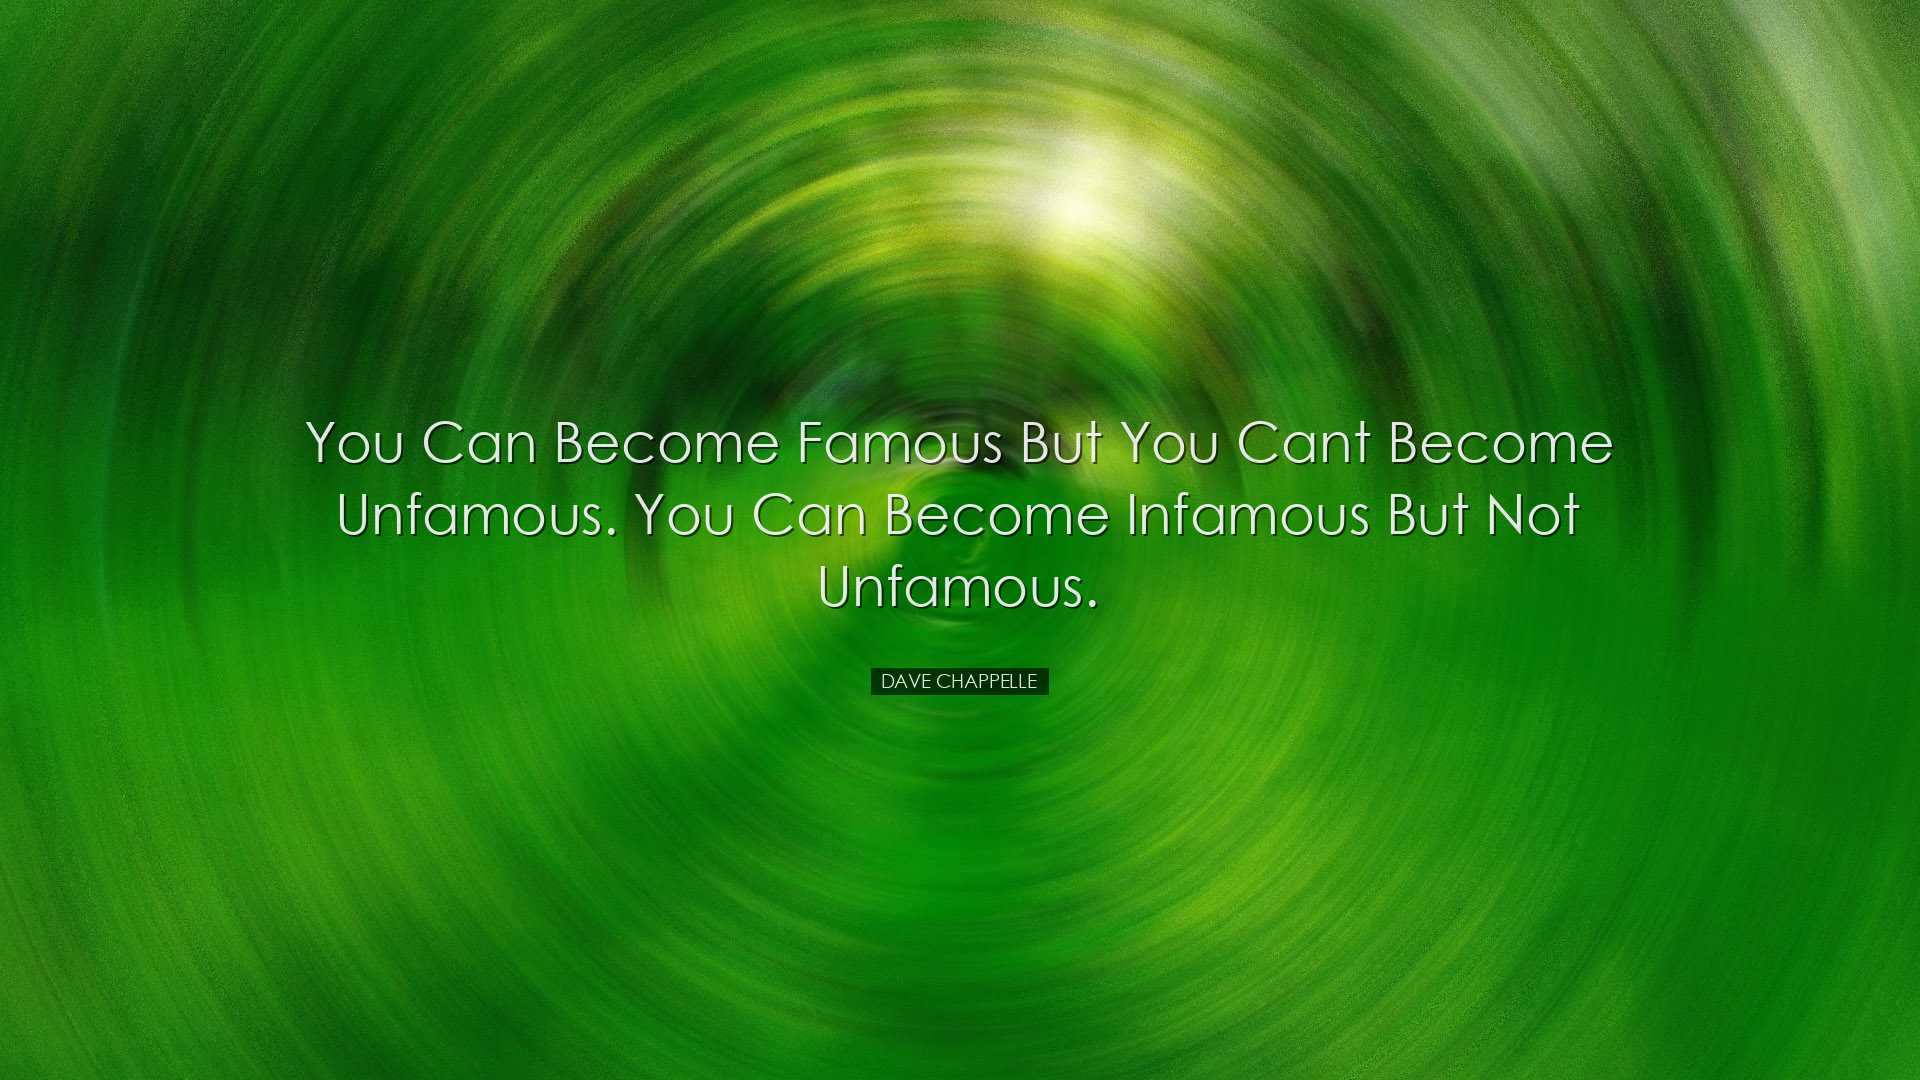 You can become famous but you cant become unfamous. You can become